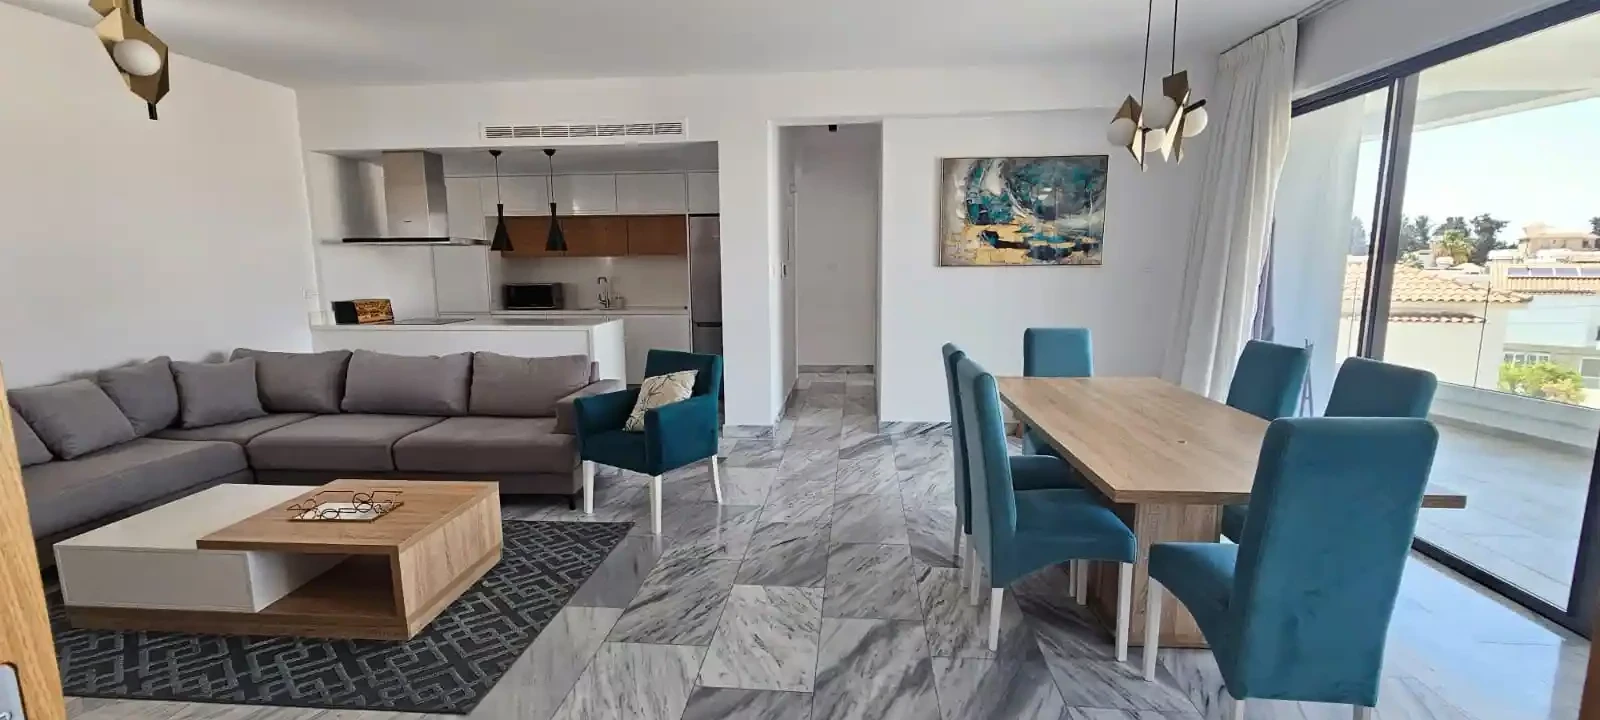 3-bedroom apartment to rent €2.200, image 1